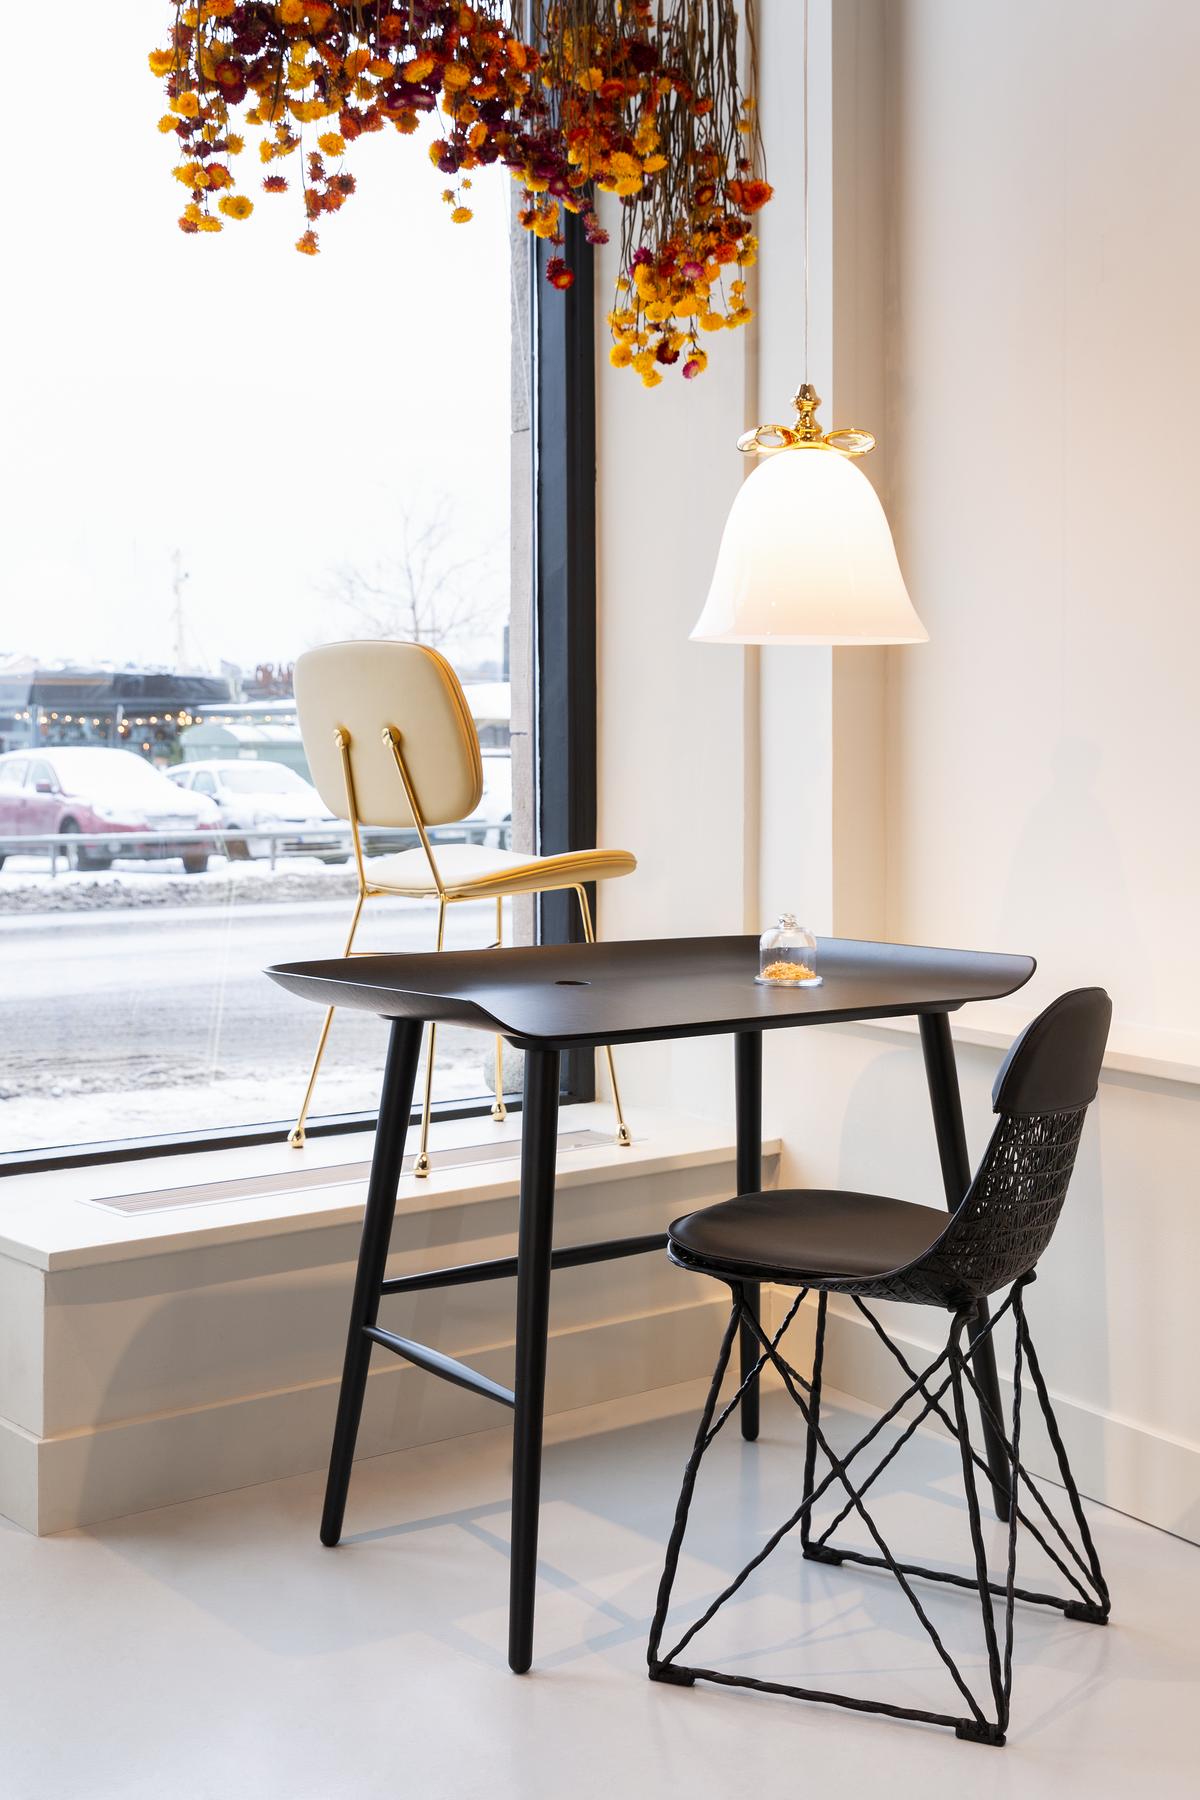 Interior of Stockholm Showroom with The Golden Chair, Woood desk and Bell Lamp suspension